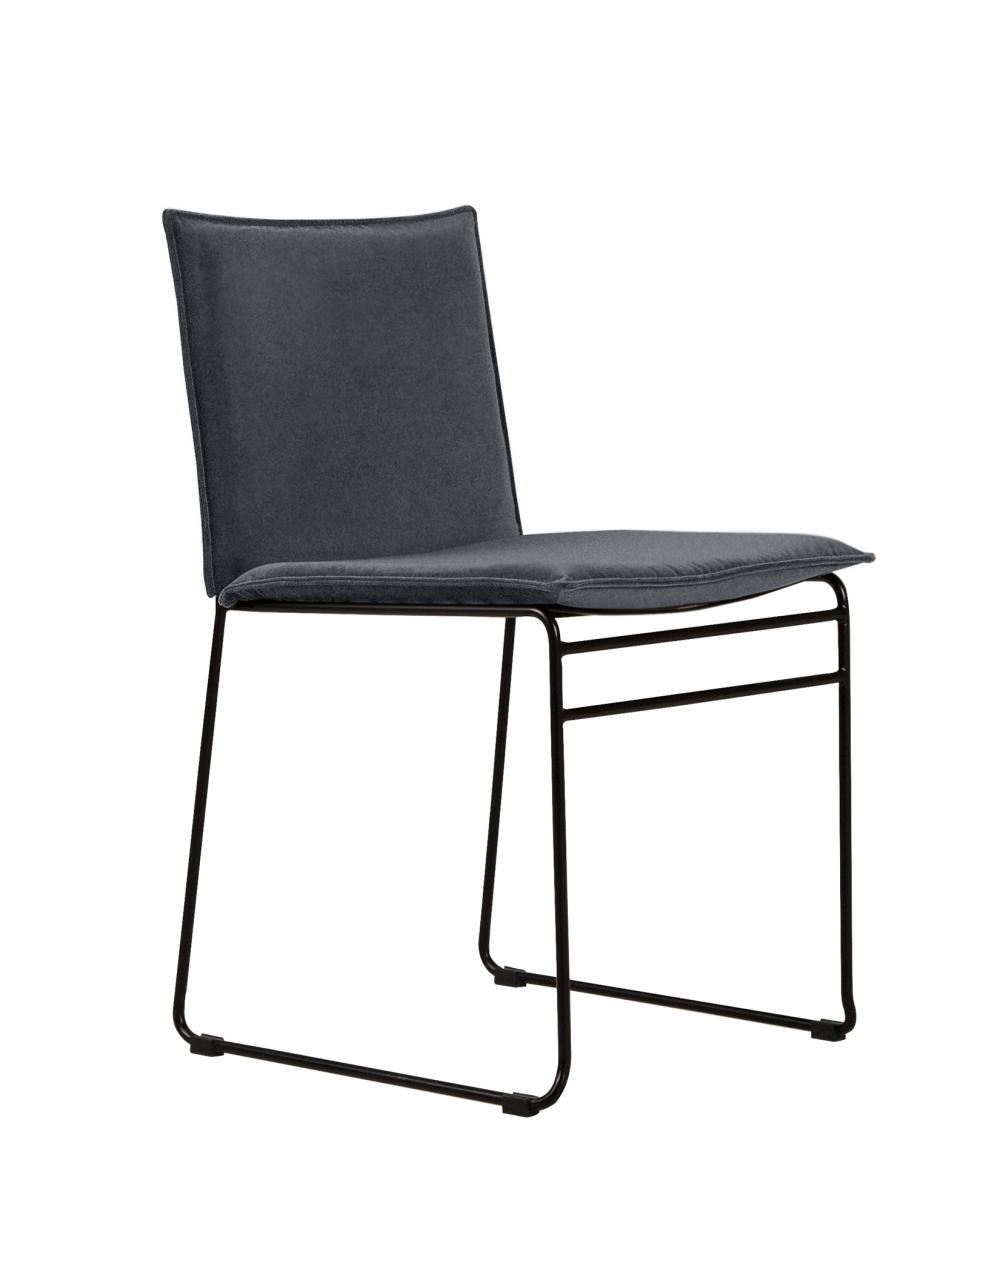 Kyst Dining Chair Outdoor Black Steel Chair Black